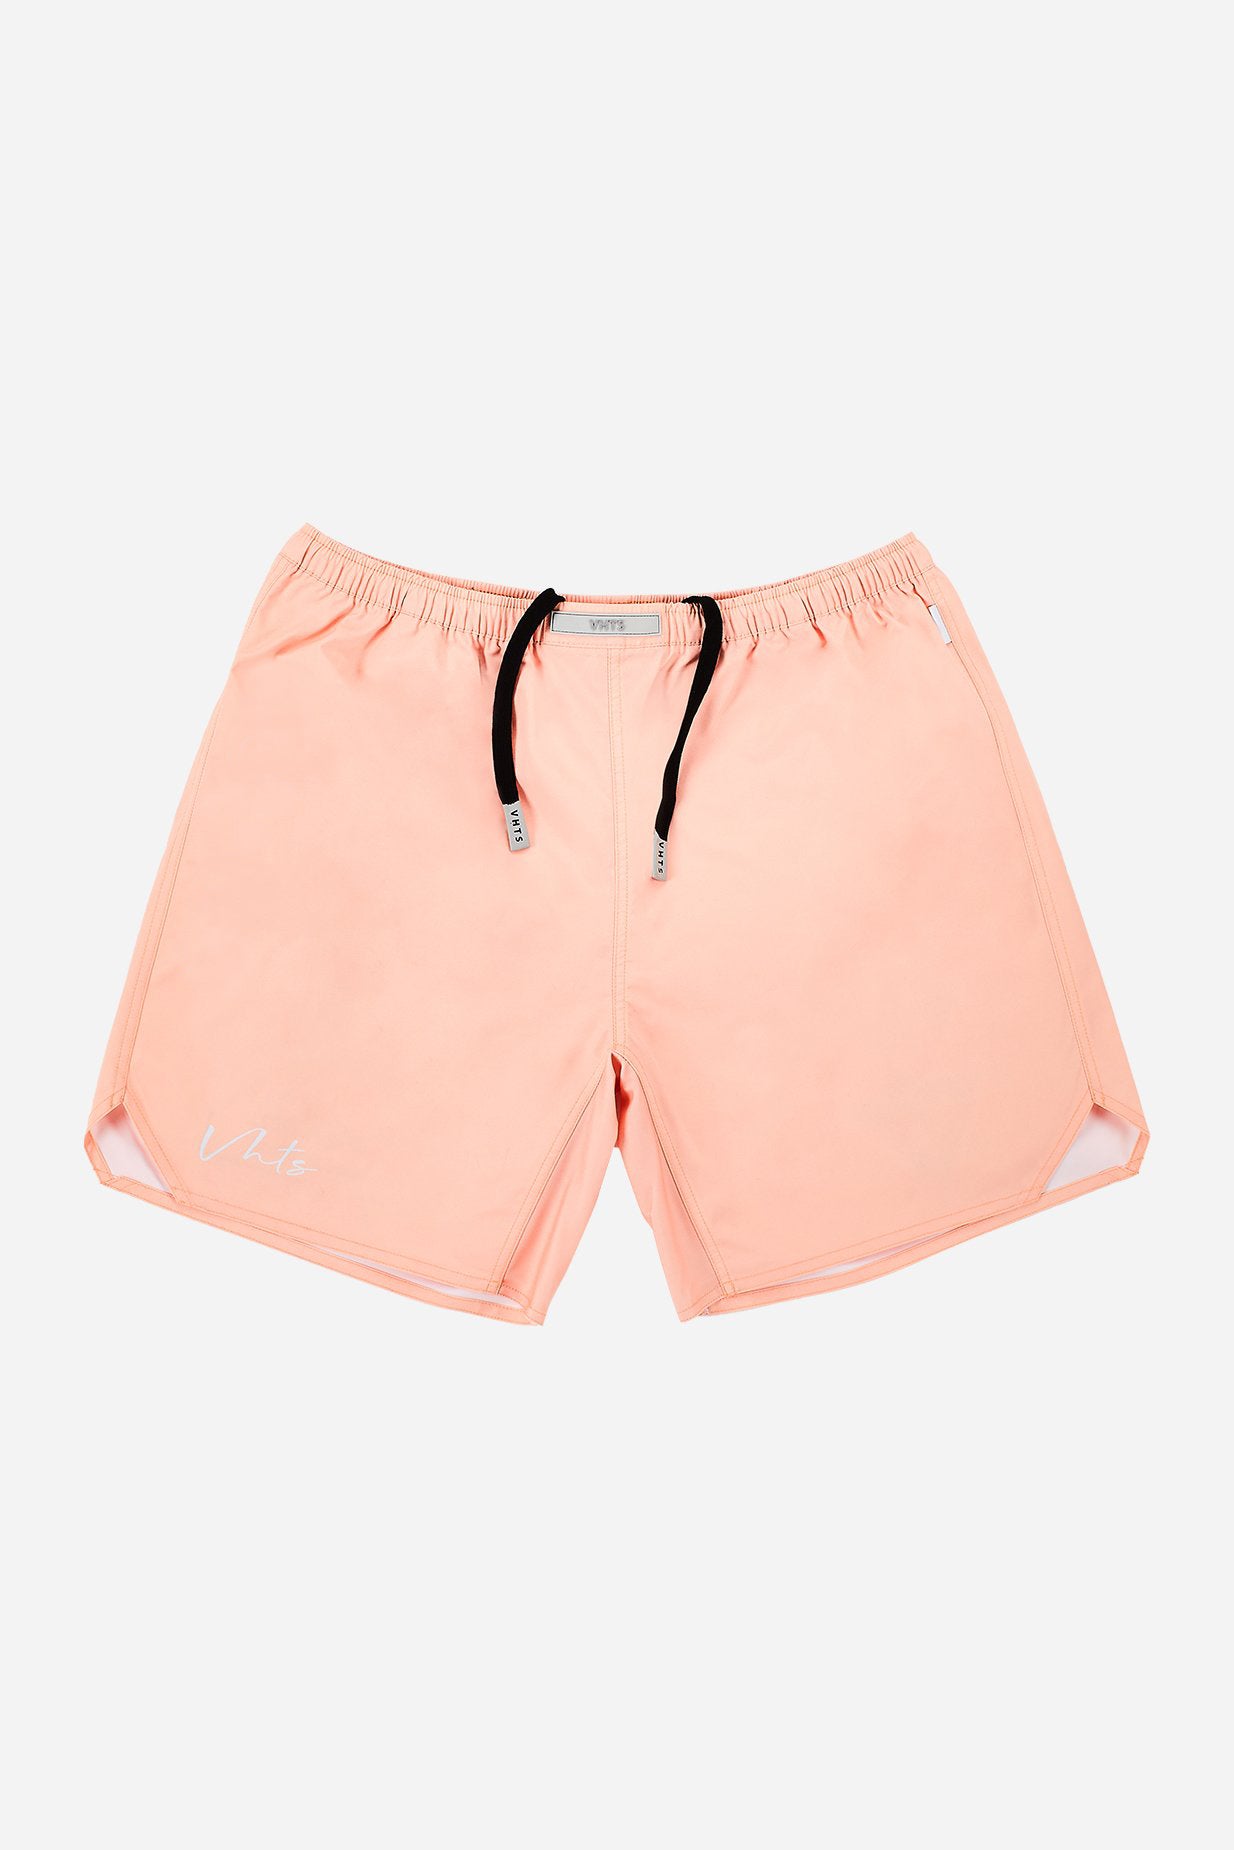 NICKY ROD SPECIAL EDITION Combat shorts Coral